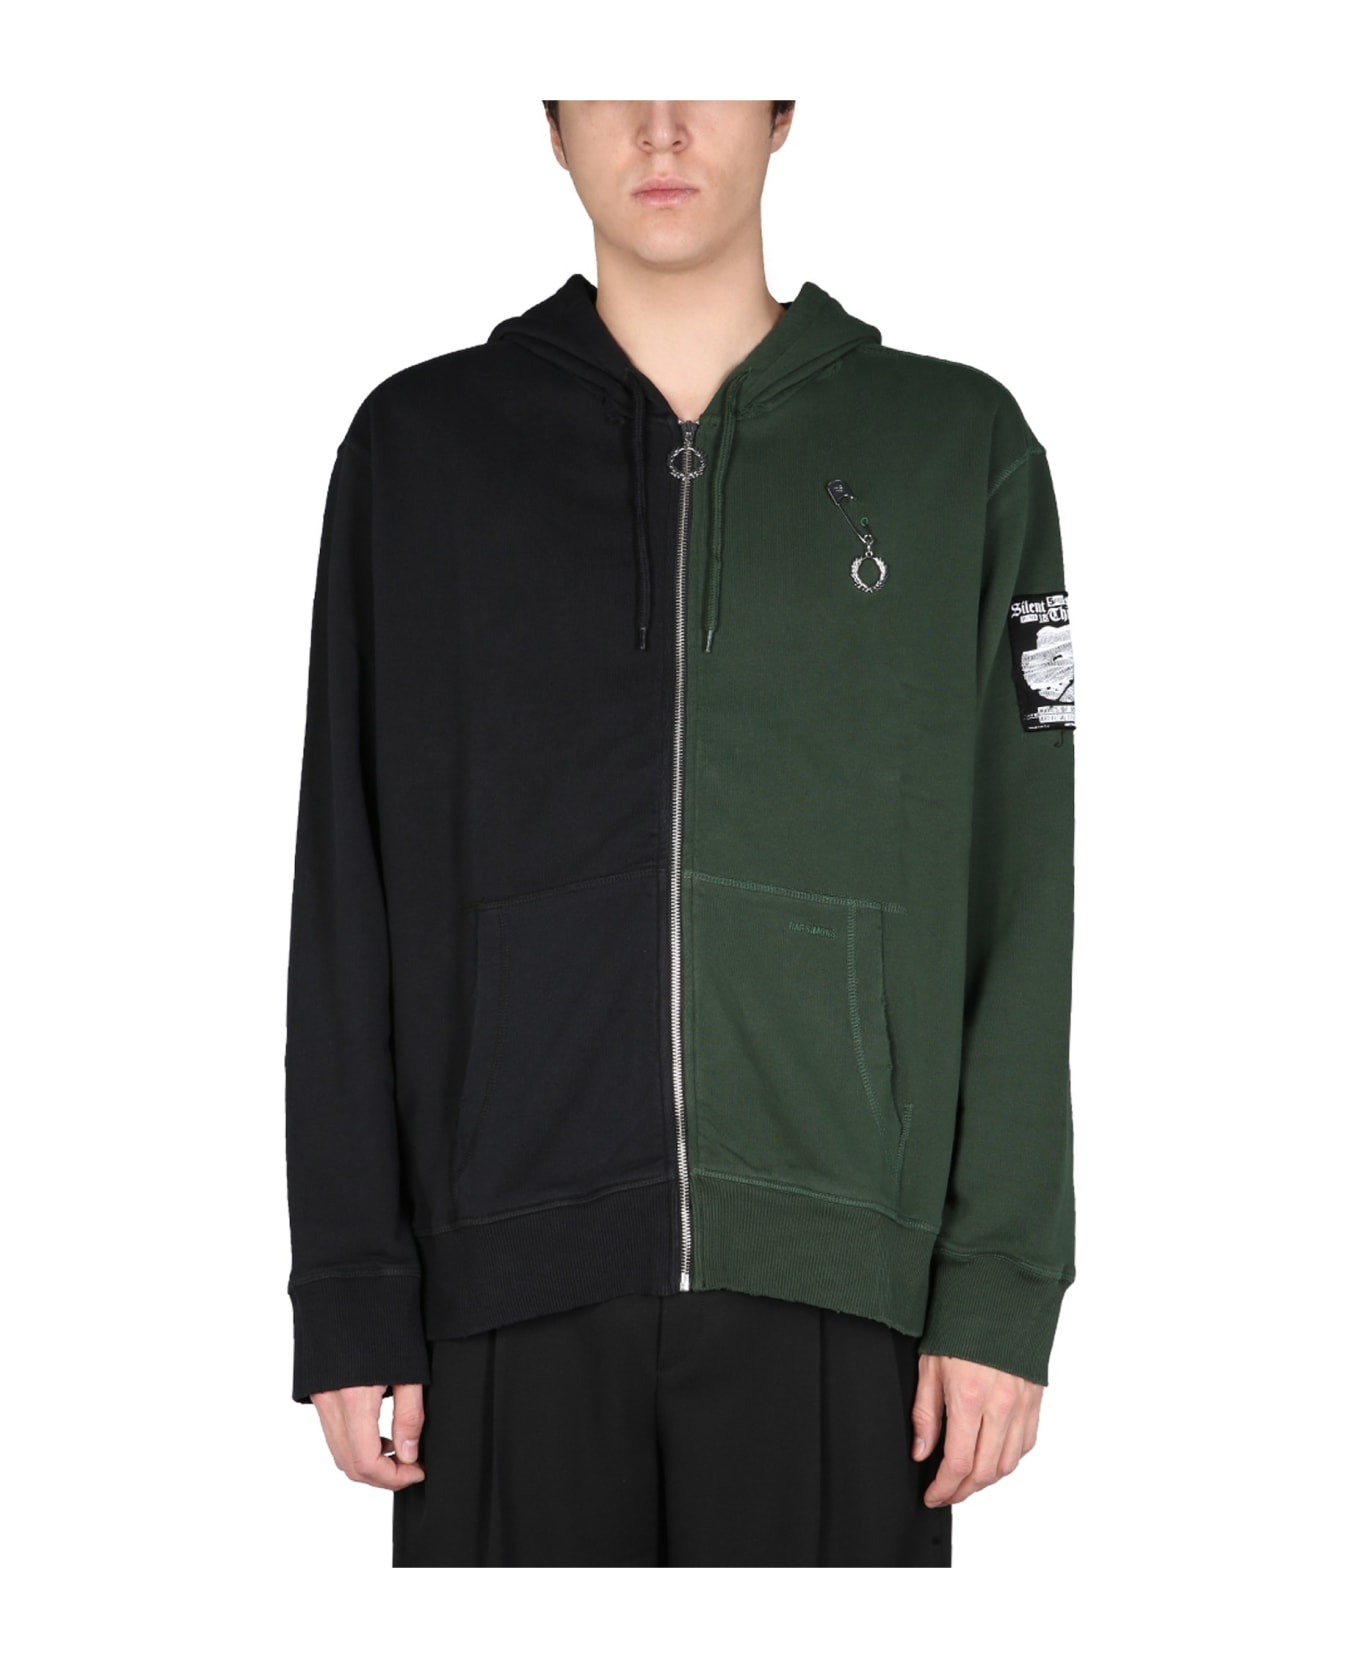 Fred Perry by Raf Simons Zip Sweatshirt. - MULTICOLOR